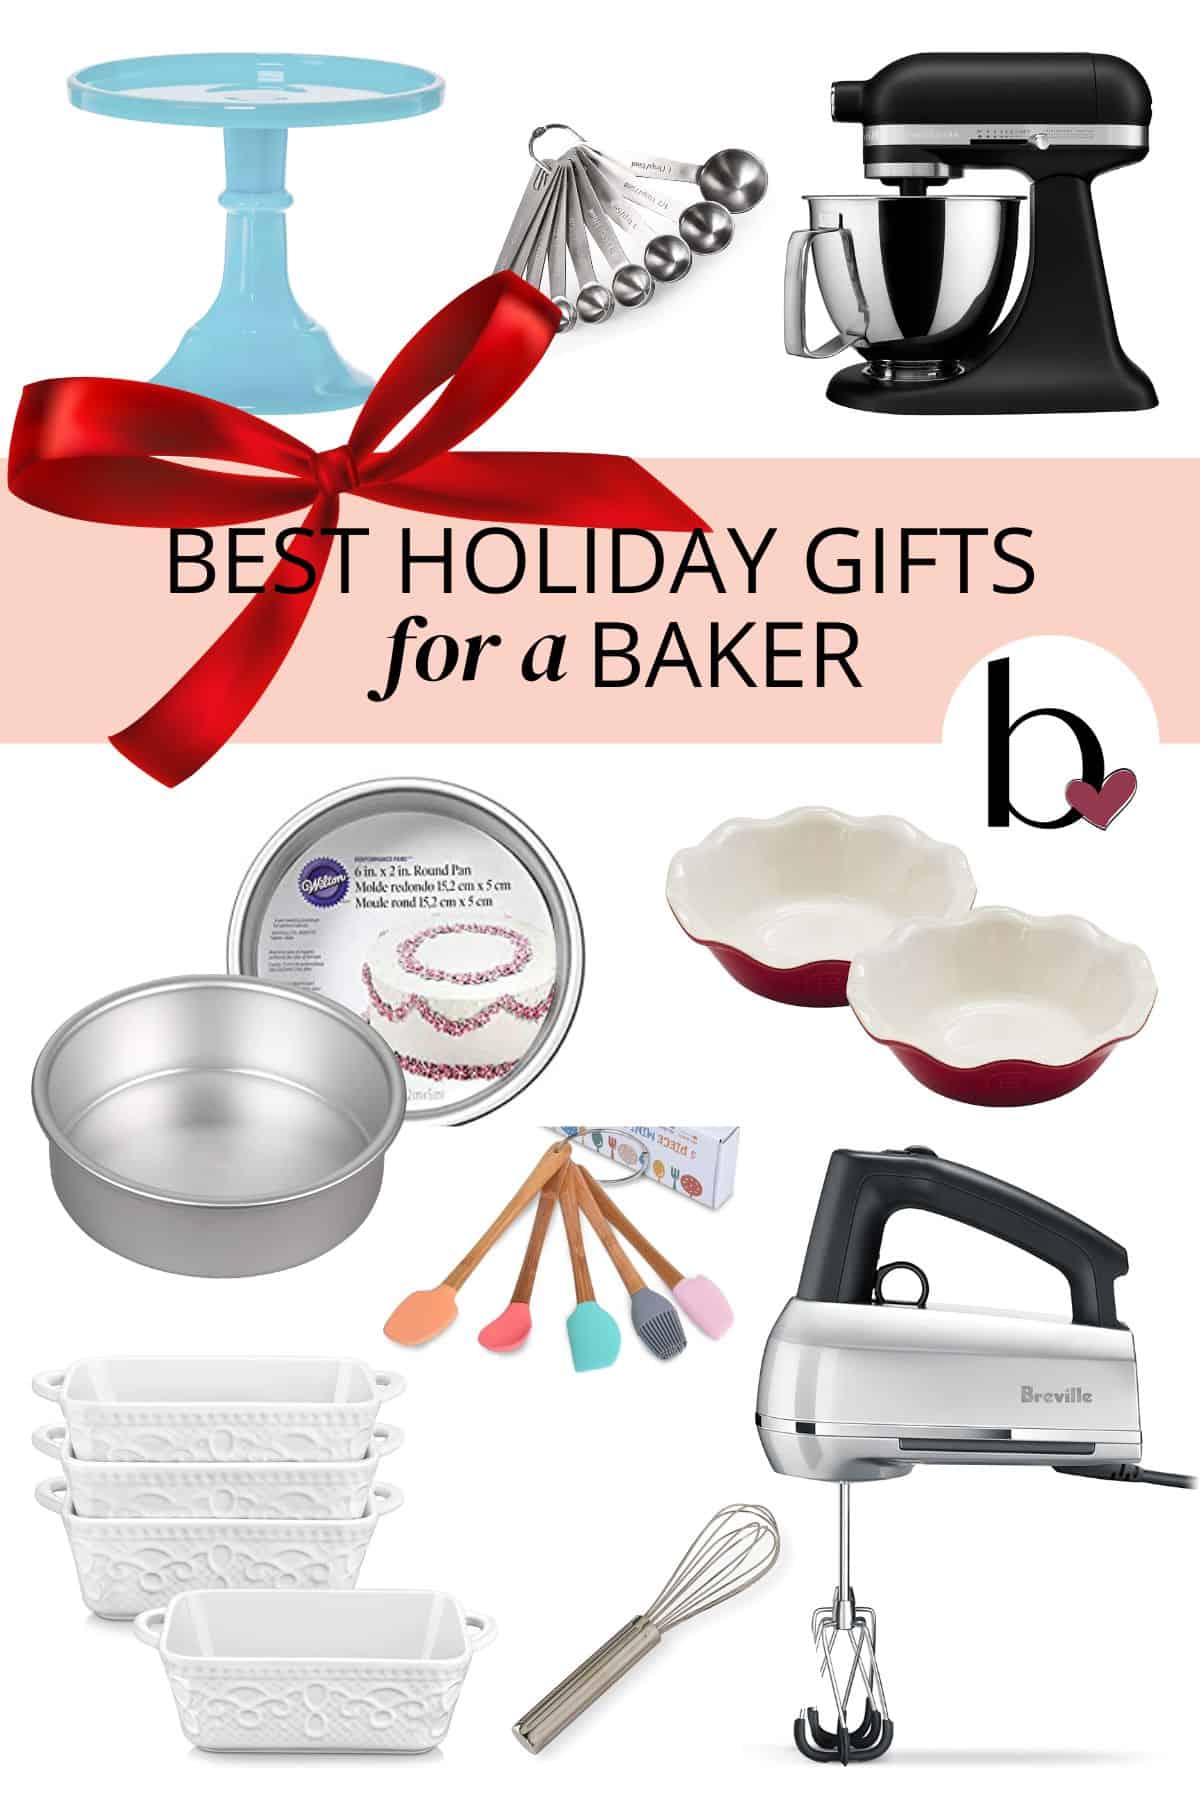 A collage of the best baking gift ideas for a baker.